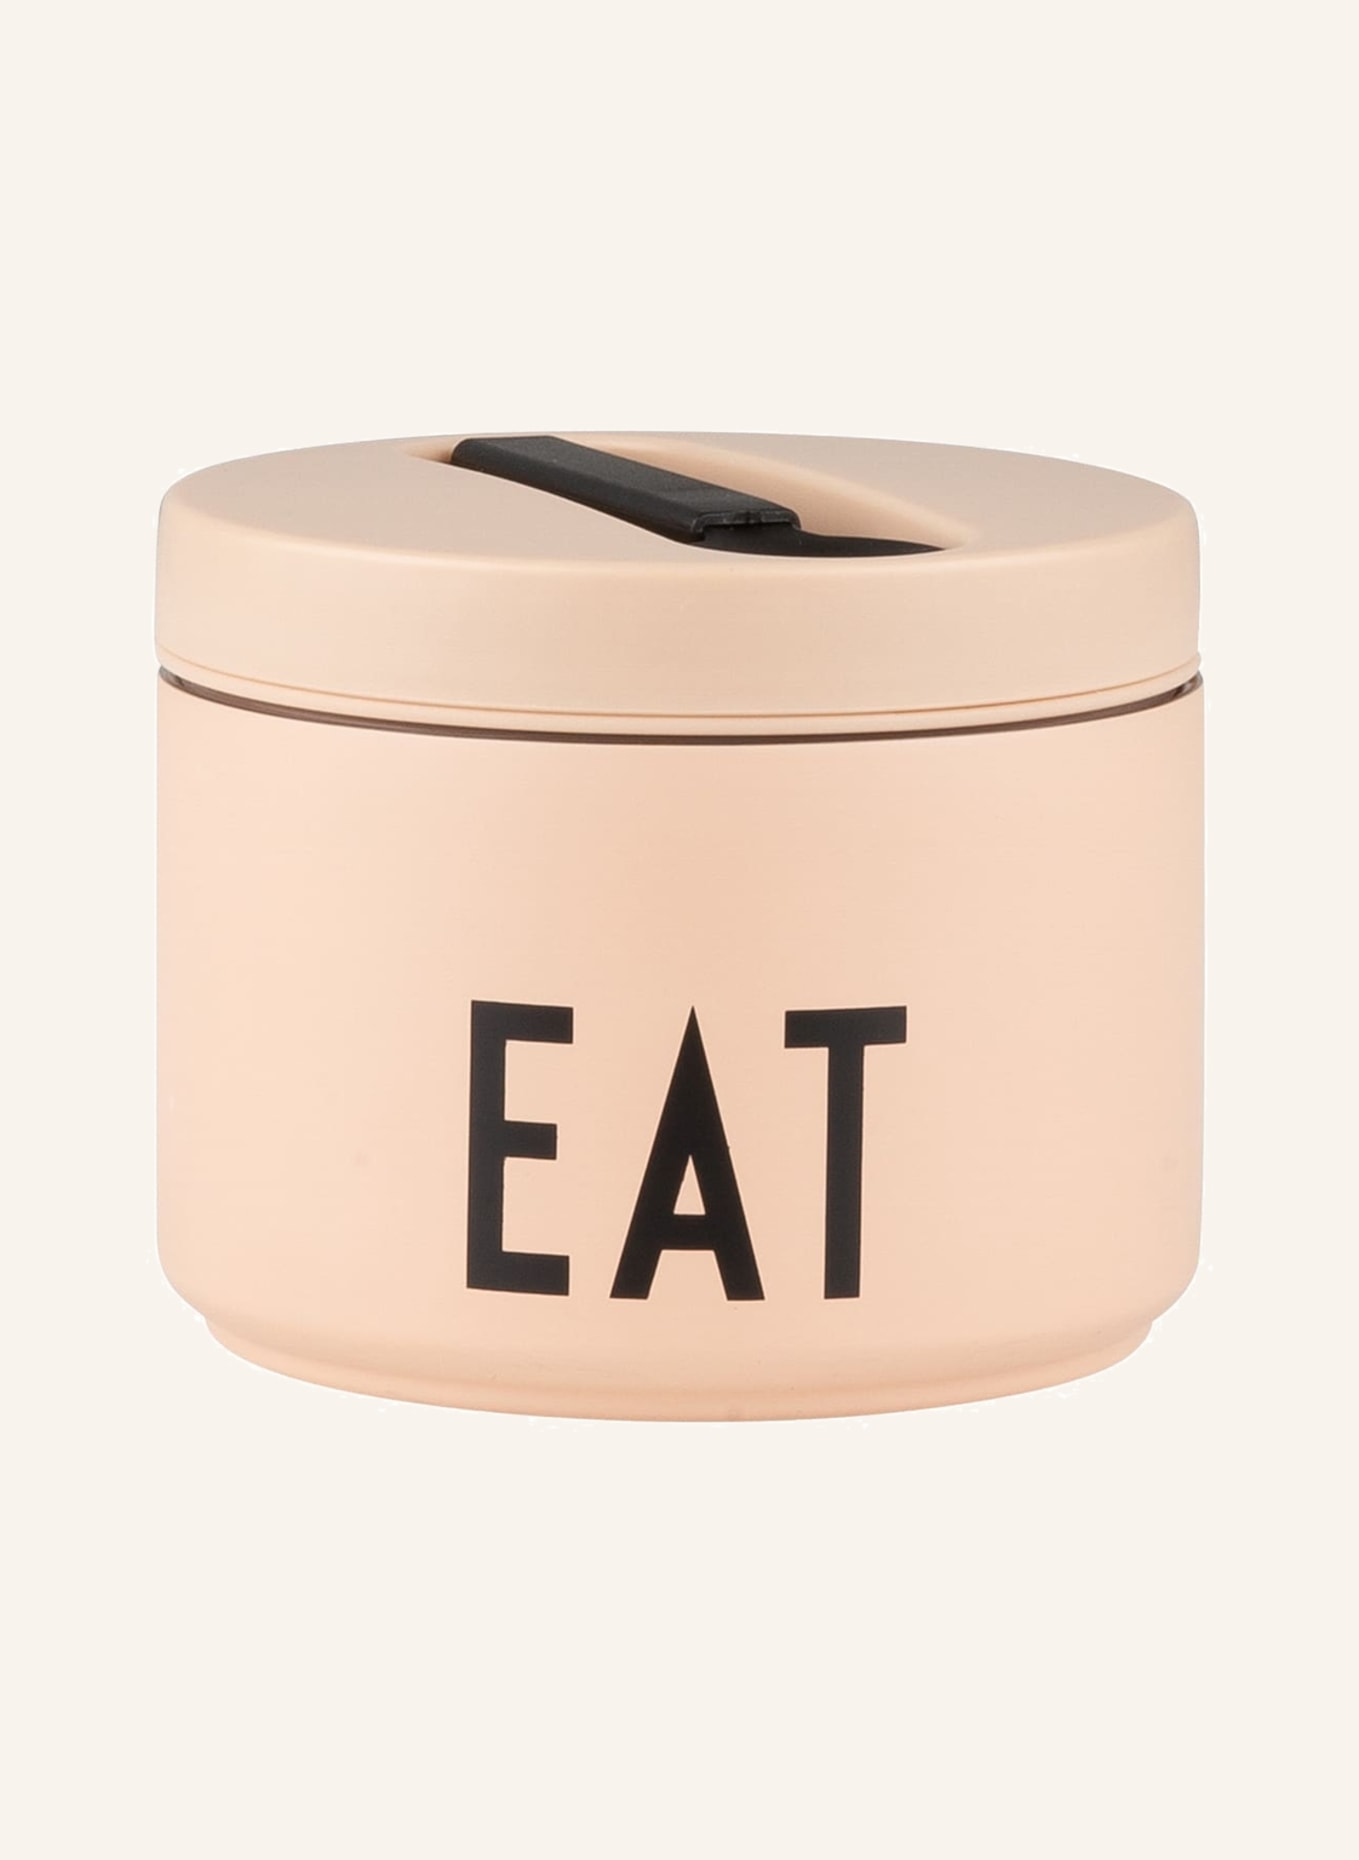 DESIGN LETTERS Thermo-Lunchbox EAT SMALL, Farbe: NUDE/ SCHWARZ (Bild 1)